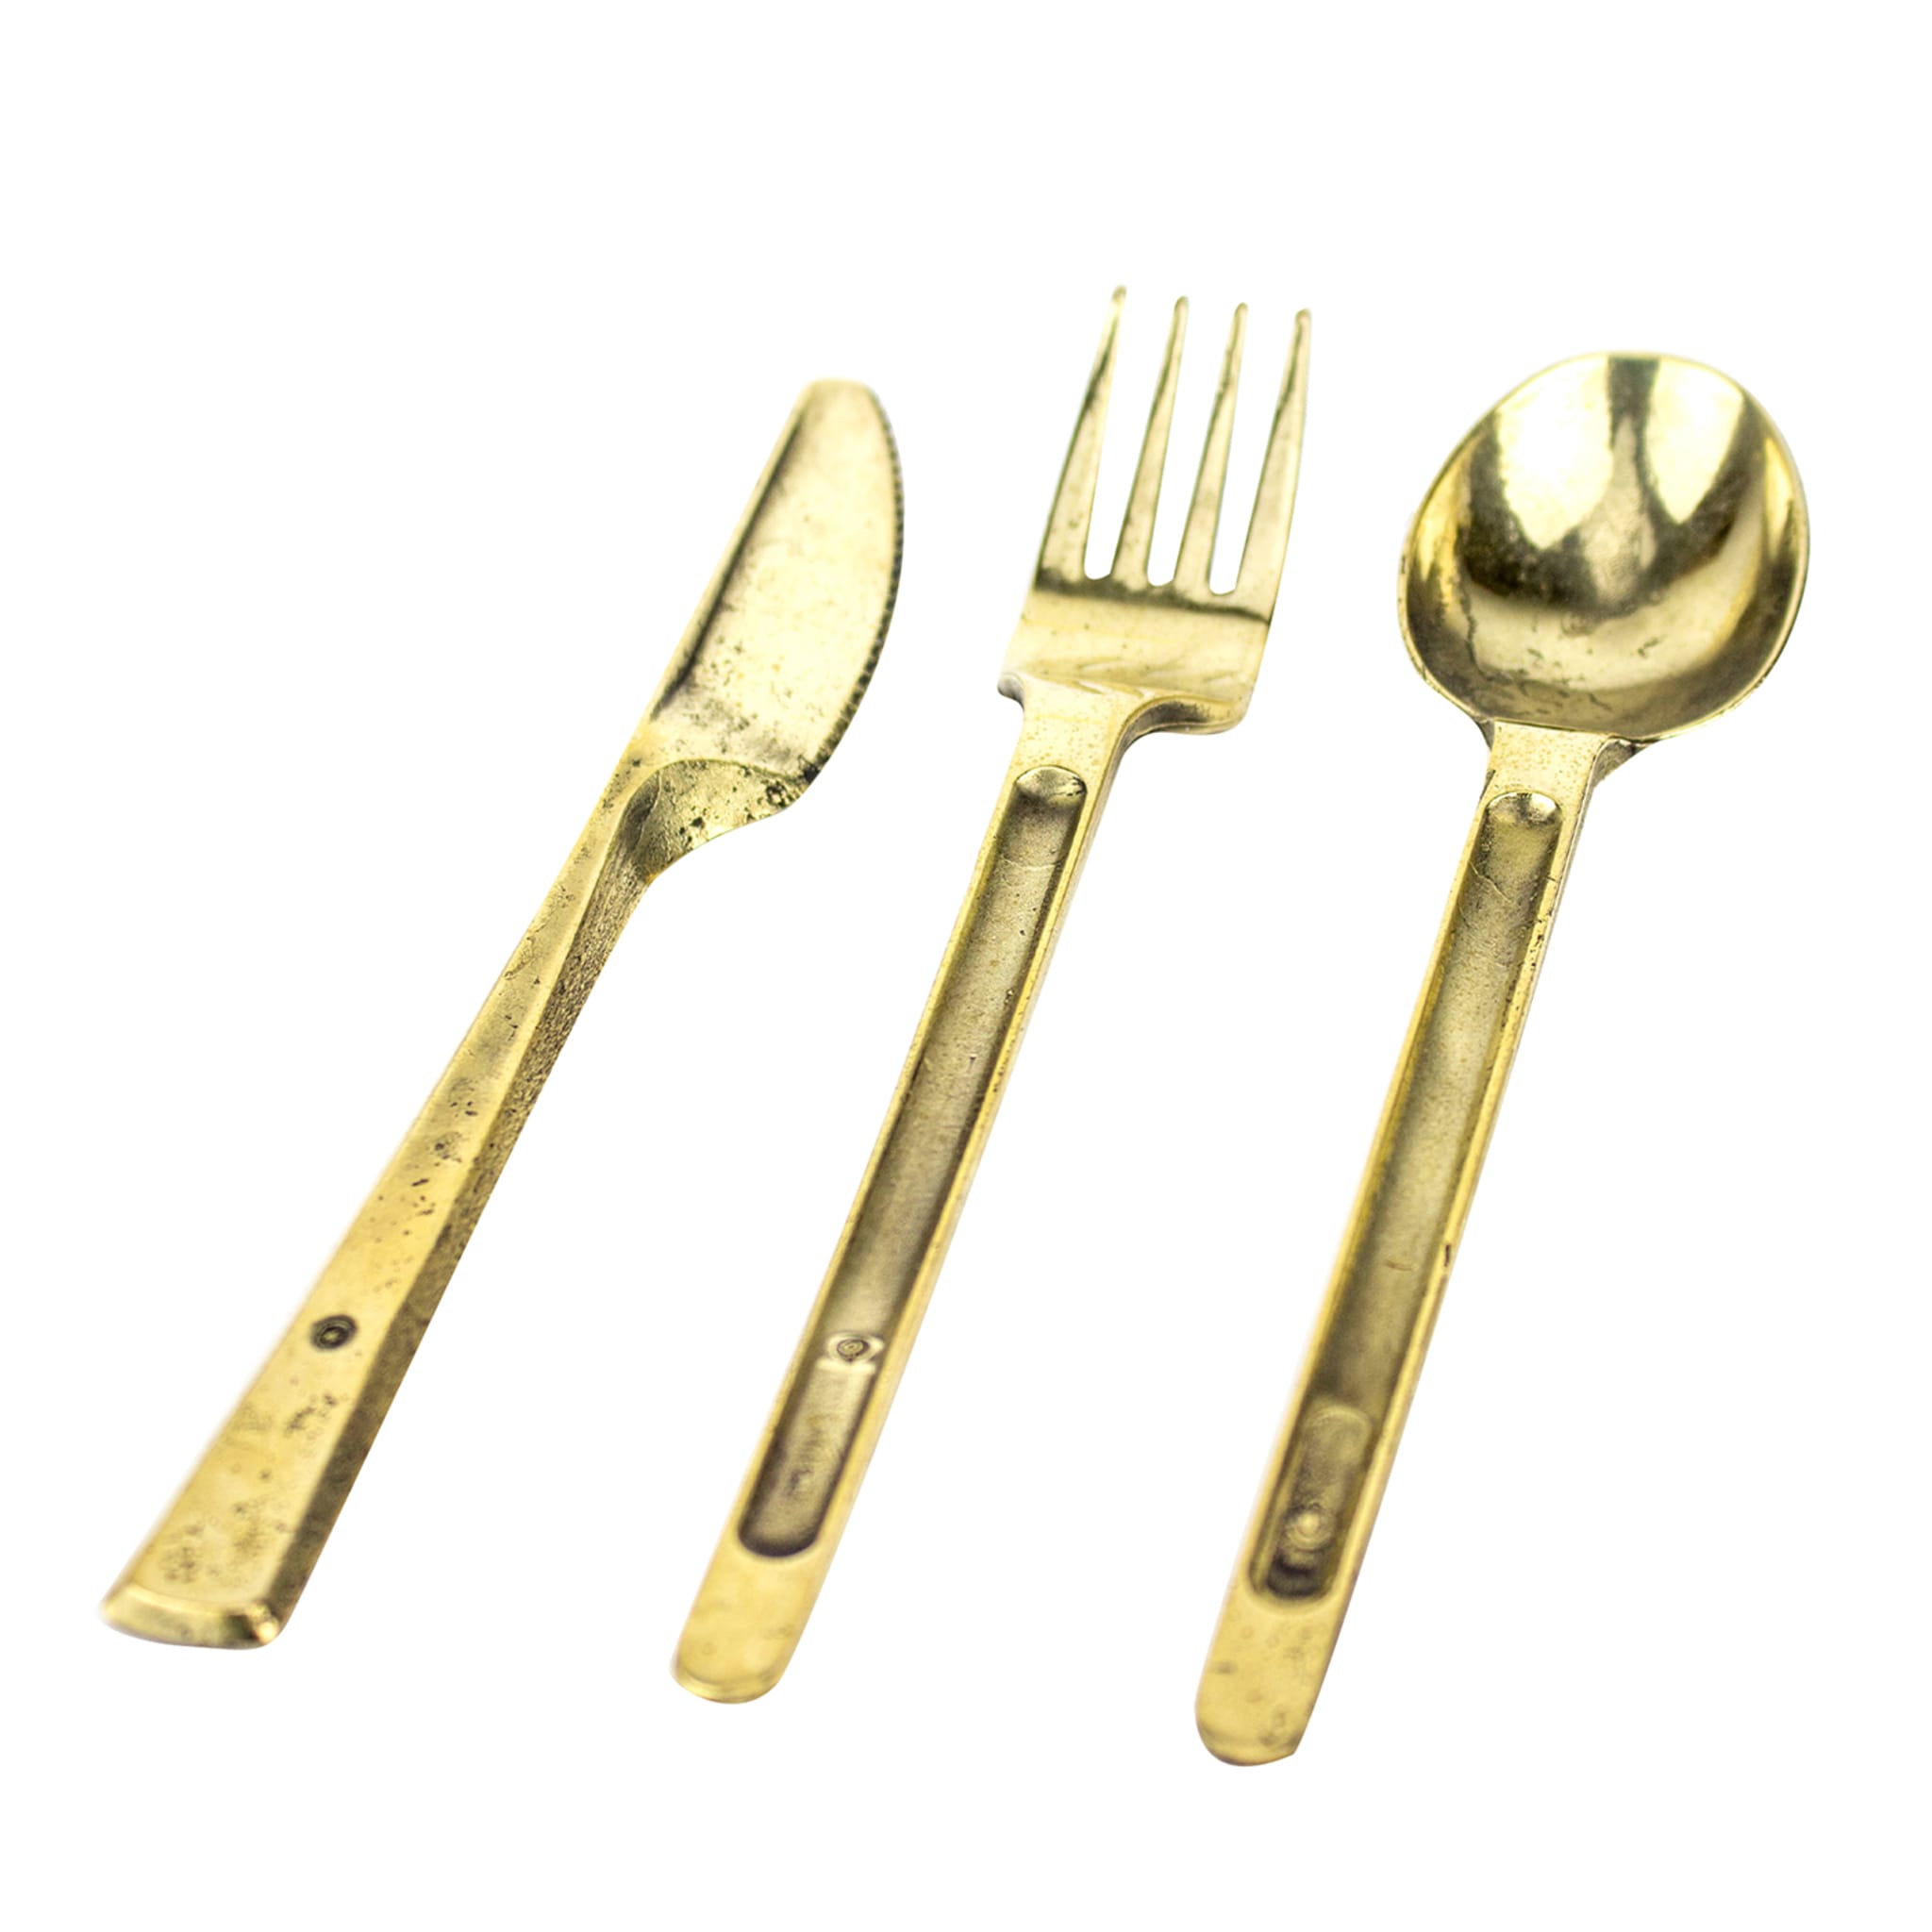 Use cutlery - Main view